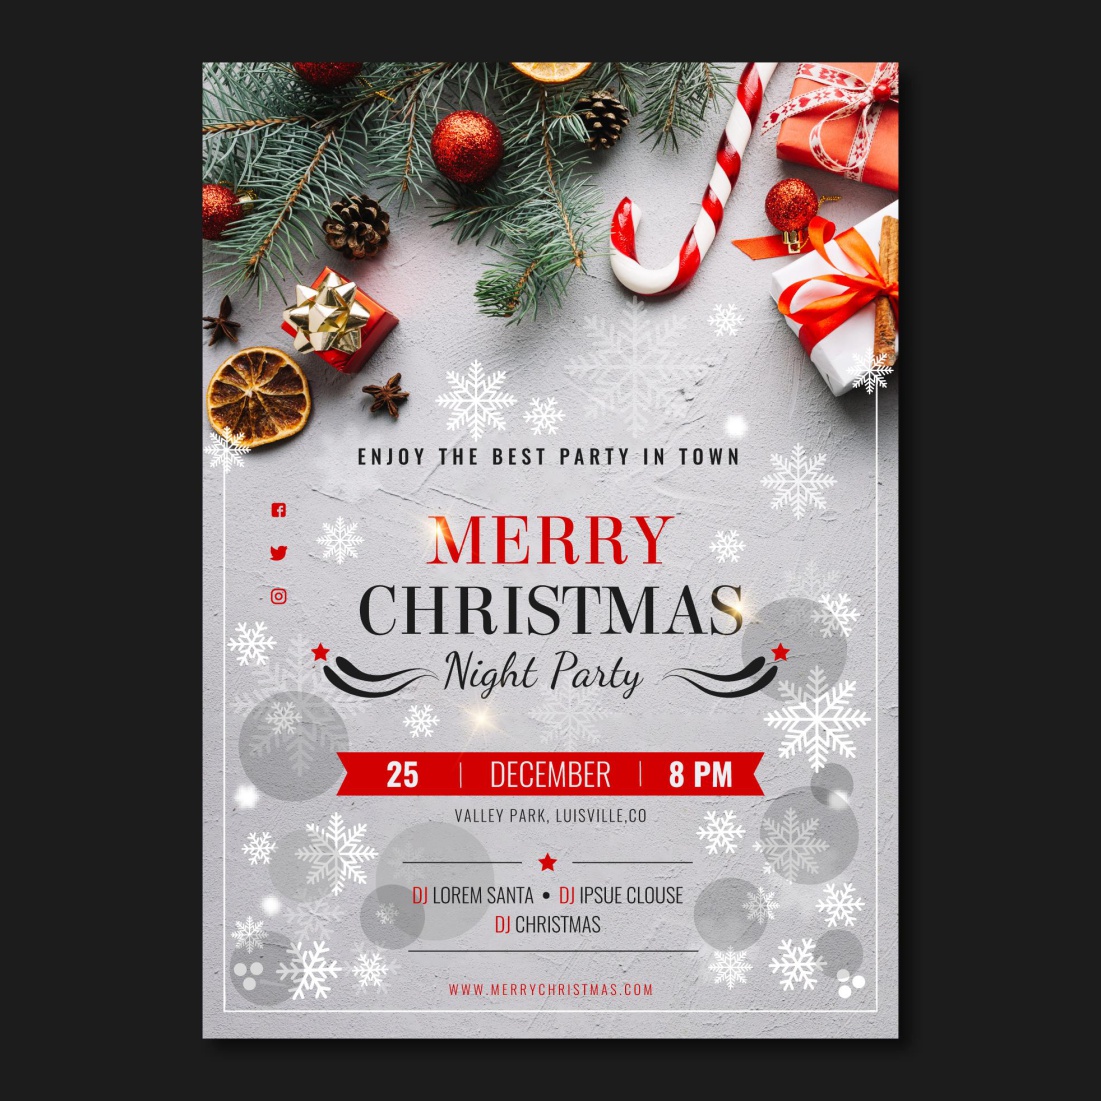 Party Poster Merry Christmas Flyer Templates cover image.